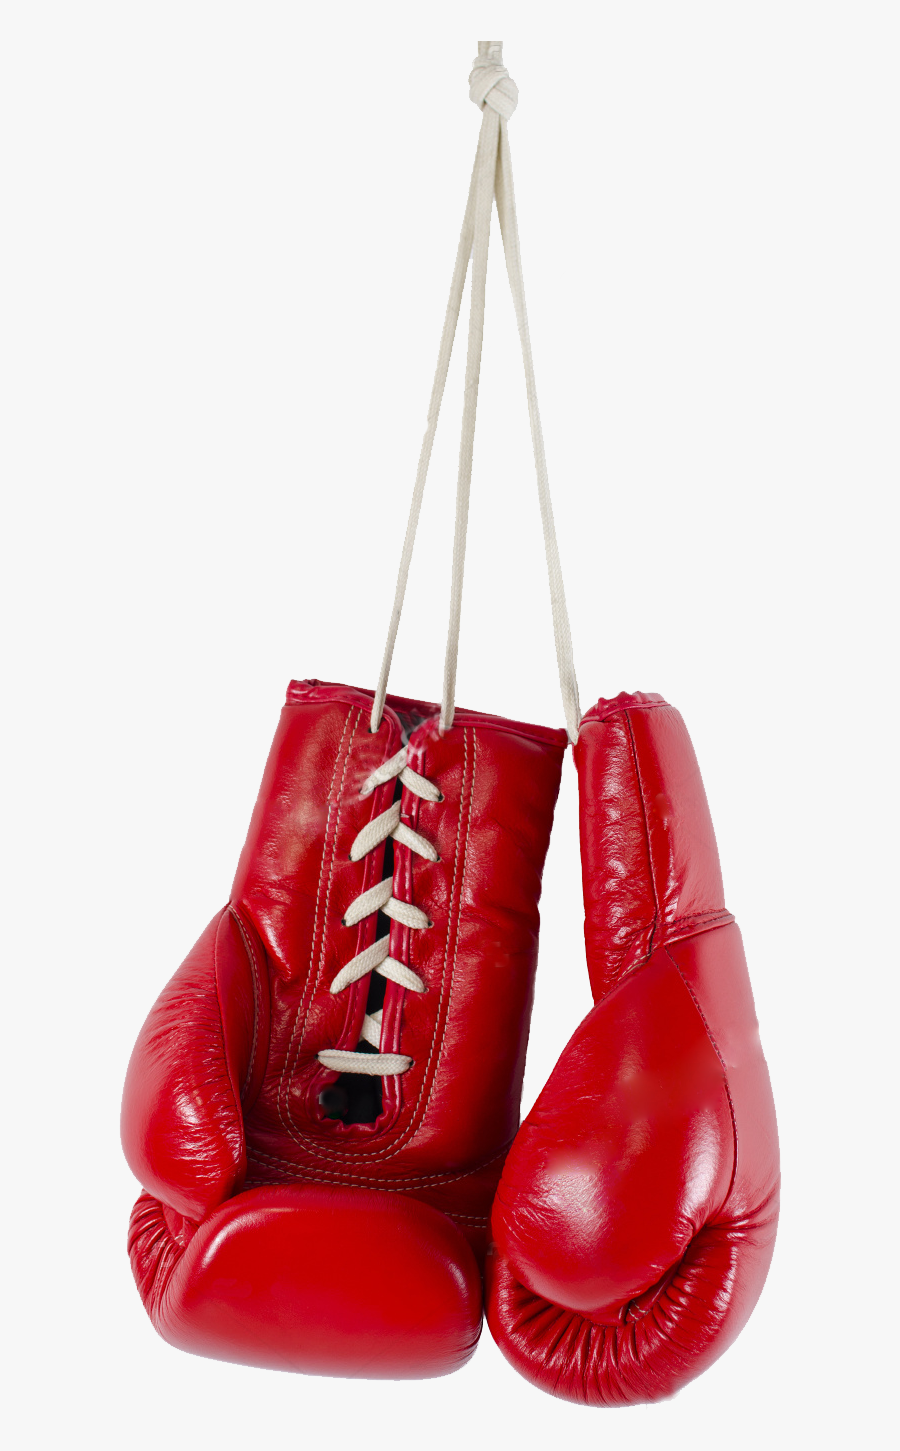 Boxing Glove Stock Photography - Breast Cancer Awareness Social Media Posts, Transparent Clipart